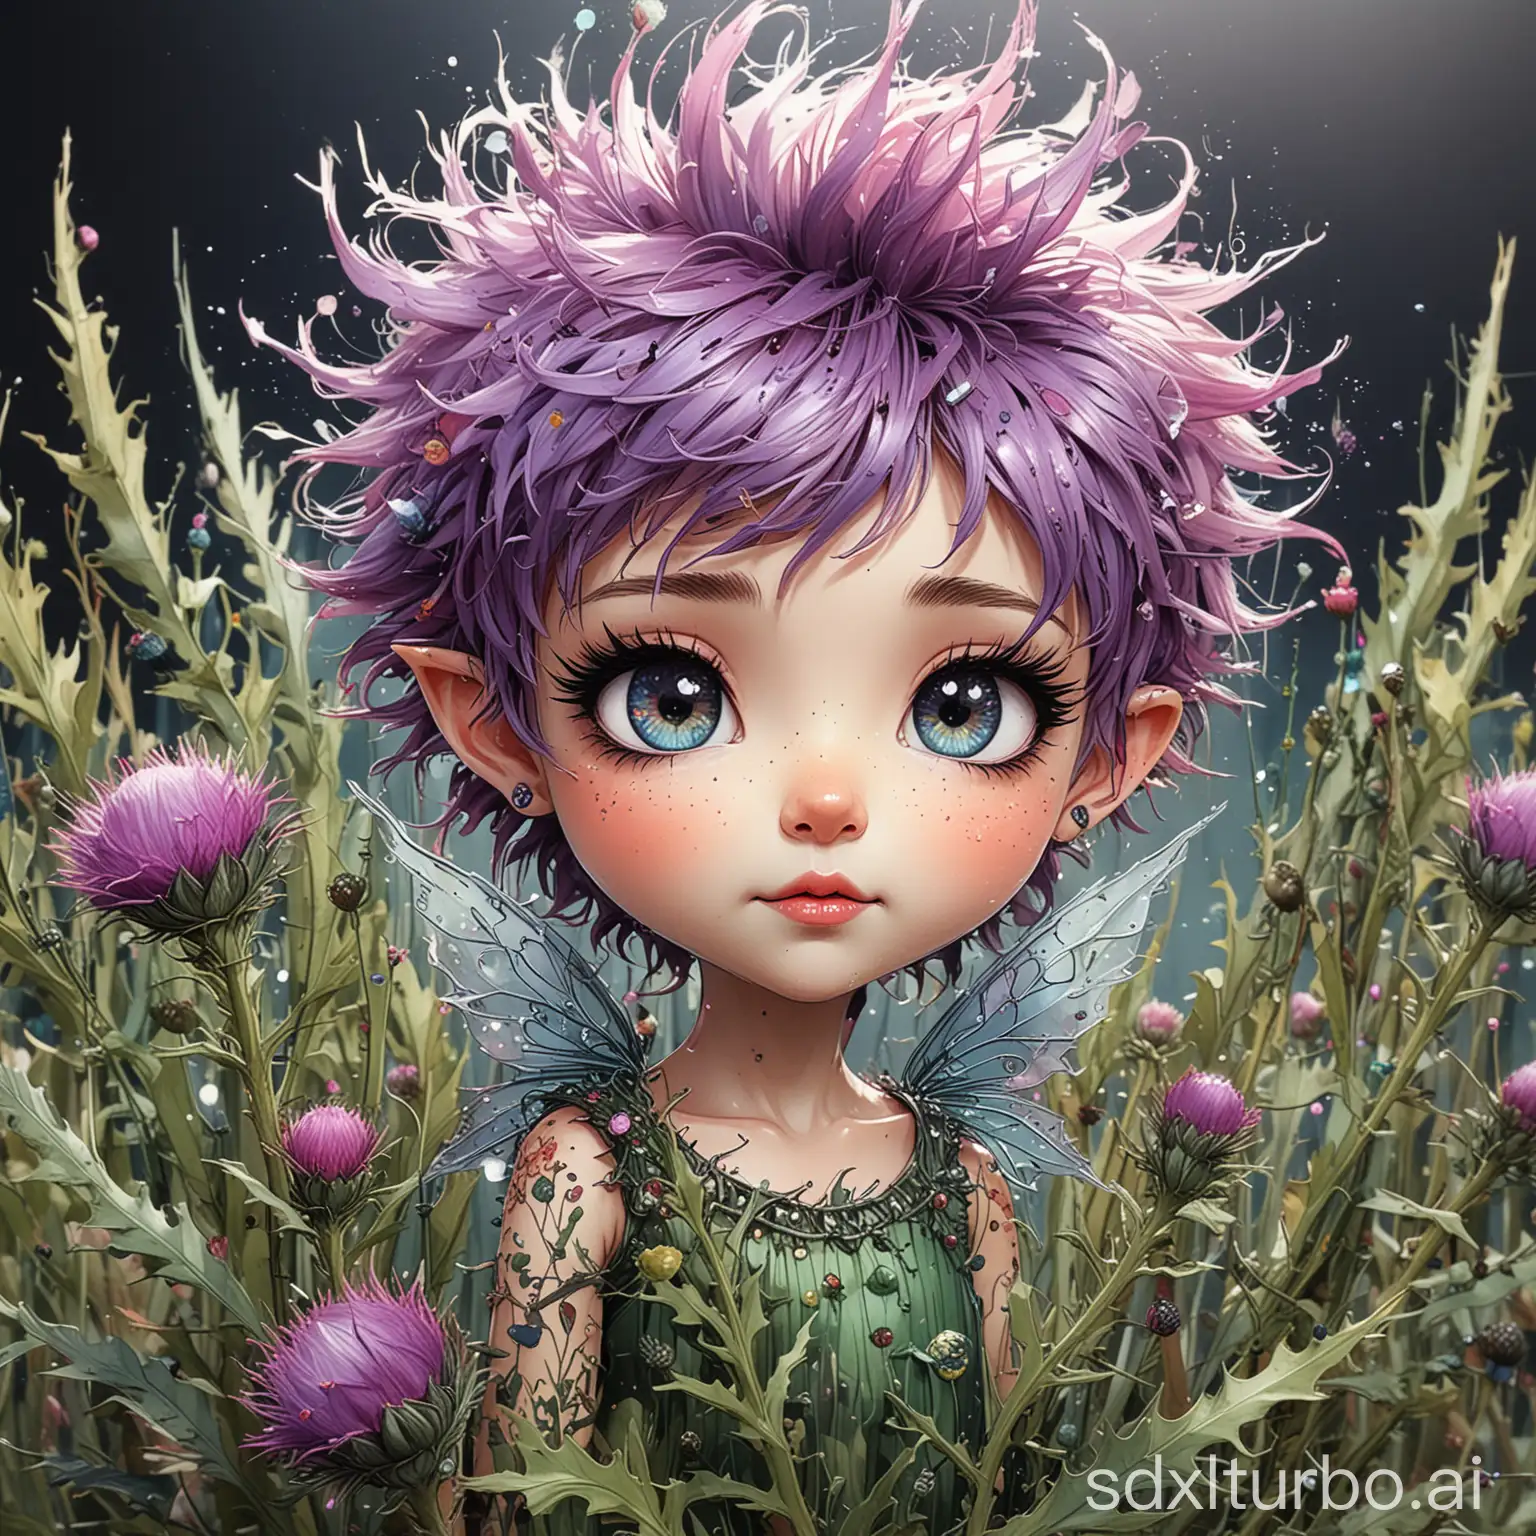 Chibi anime-style thistle fairy with a flashy, unusually snide expression, launching off a thistle bush teeming with spikes, enhanced by the intricate linework reminiscent of Quentin Blake, liquid markers adding vibrant hues, iridescent pupils glinting within the atypical emptiness of the eyes, disheveled hair blending with petals on the forehead, displaying a captivating